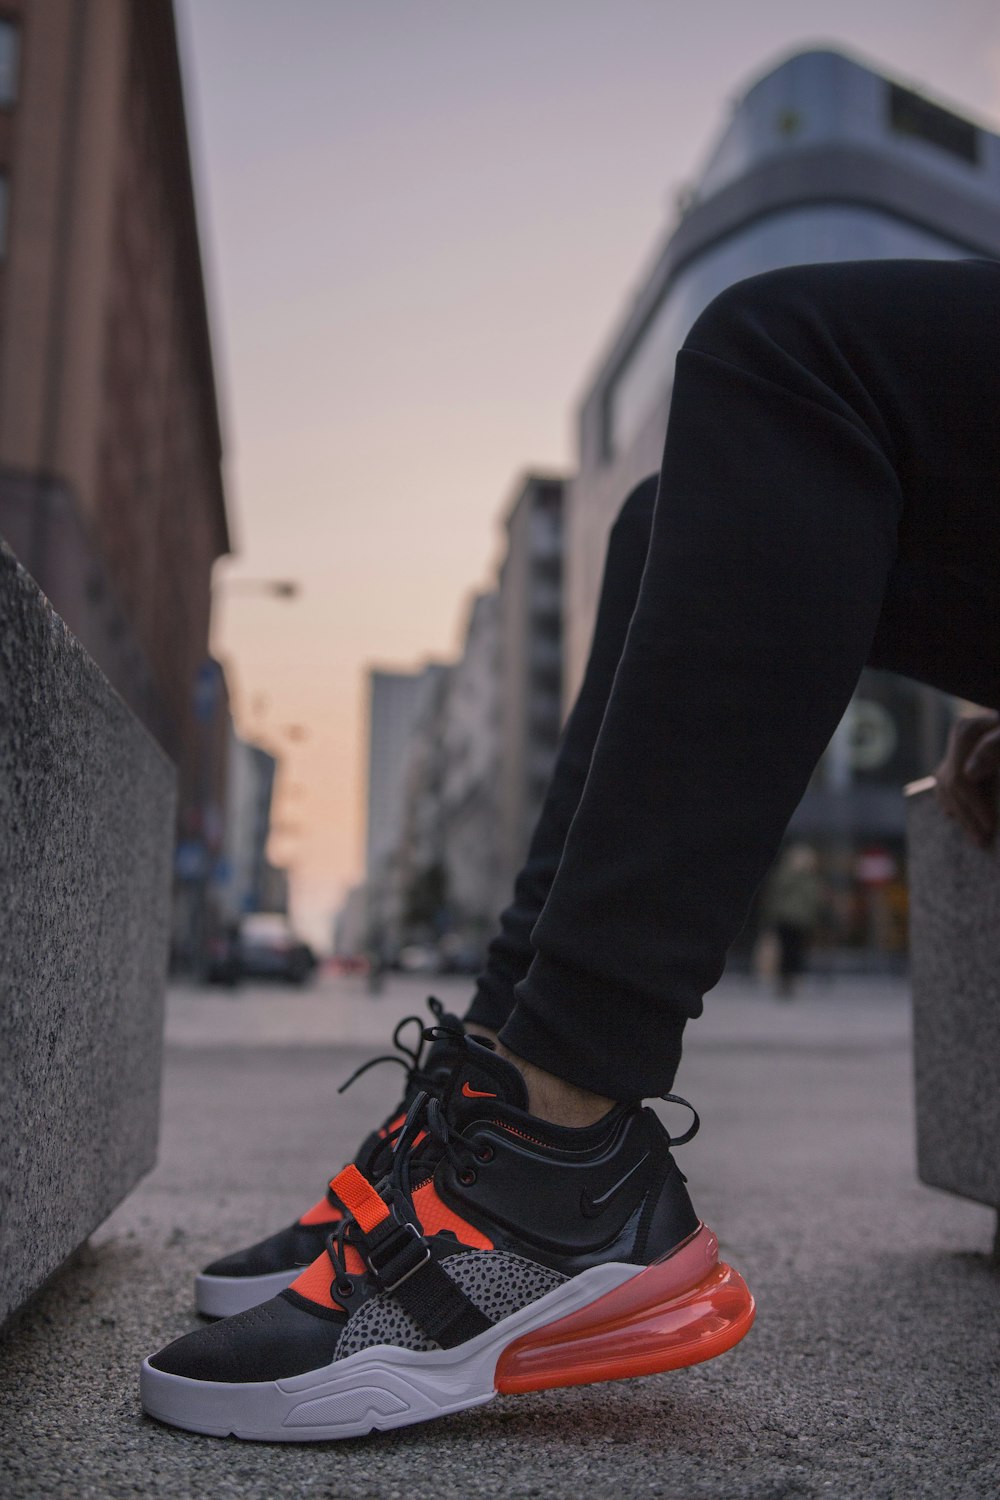 person wearing black-and-gray Nike Air Max 270 shoes photo – Free Warsaw  Image on Unsplash